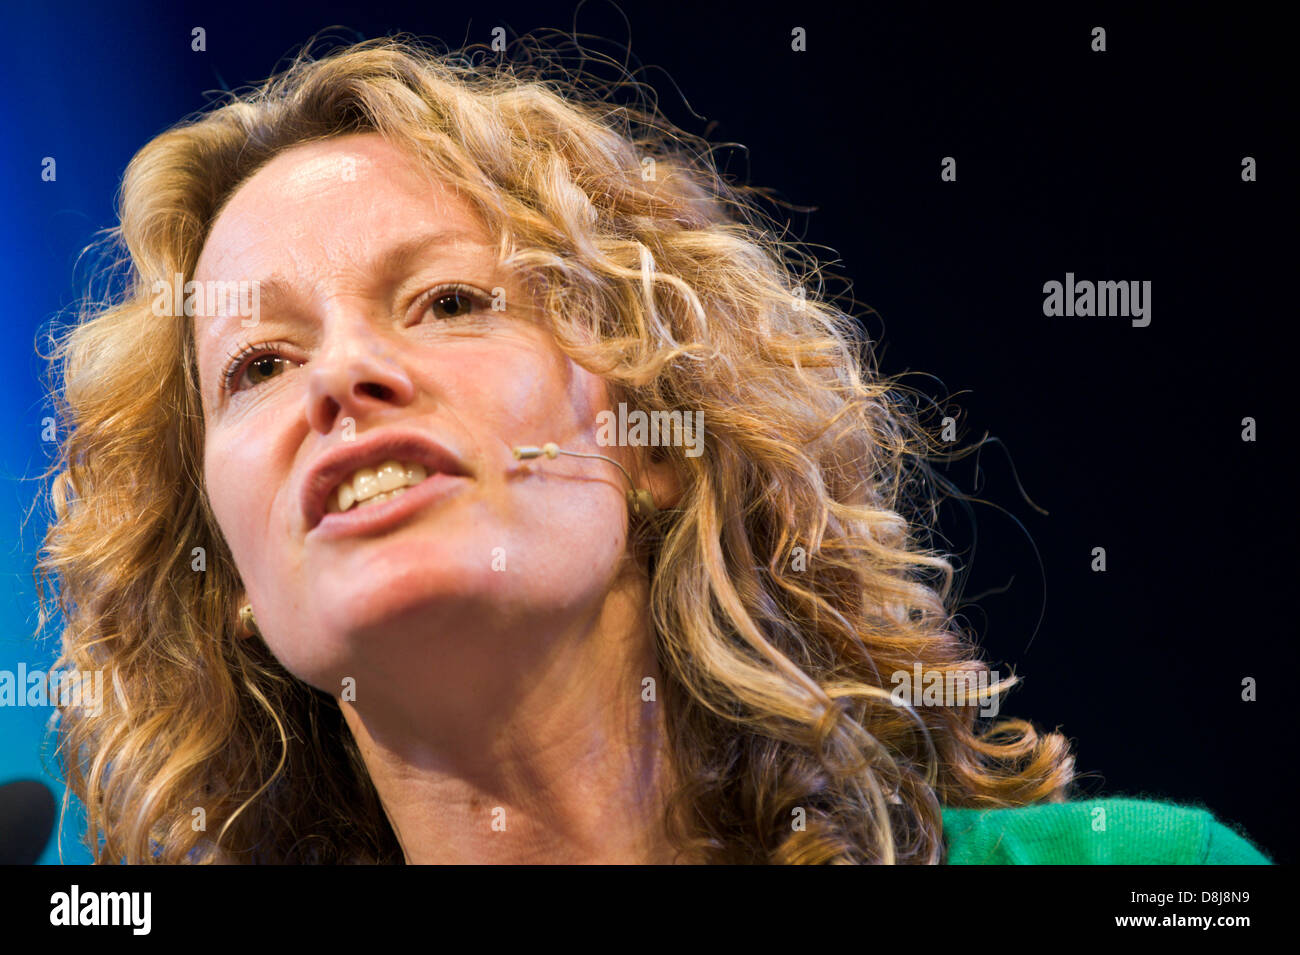 Kate umile emittente e agricoltore nella foto a Hay Festival 2013 Hay on Wye Powys Wales UK Foto Stock